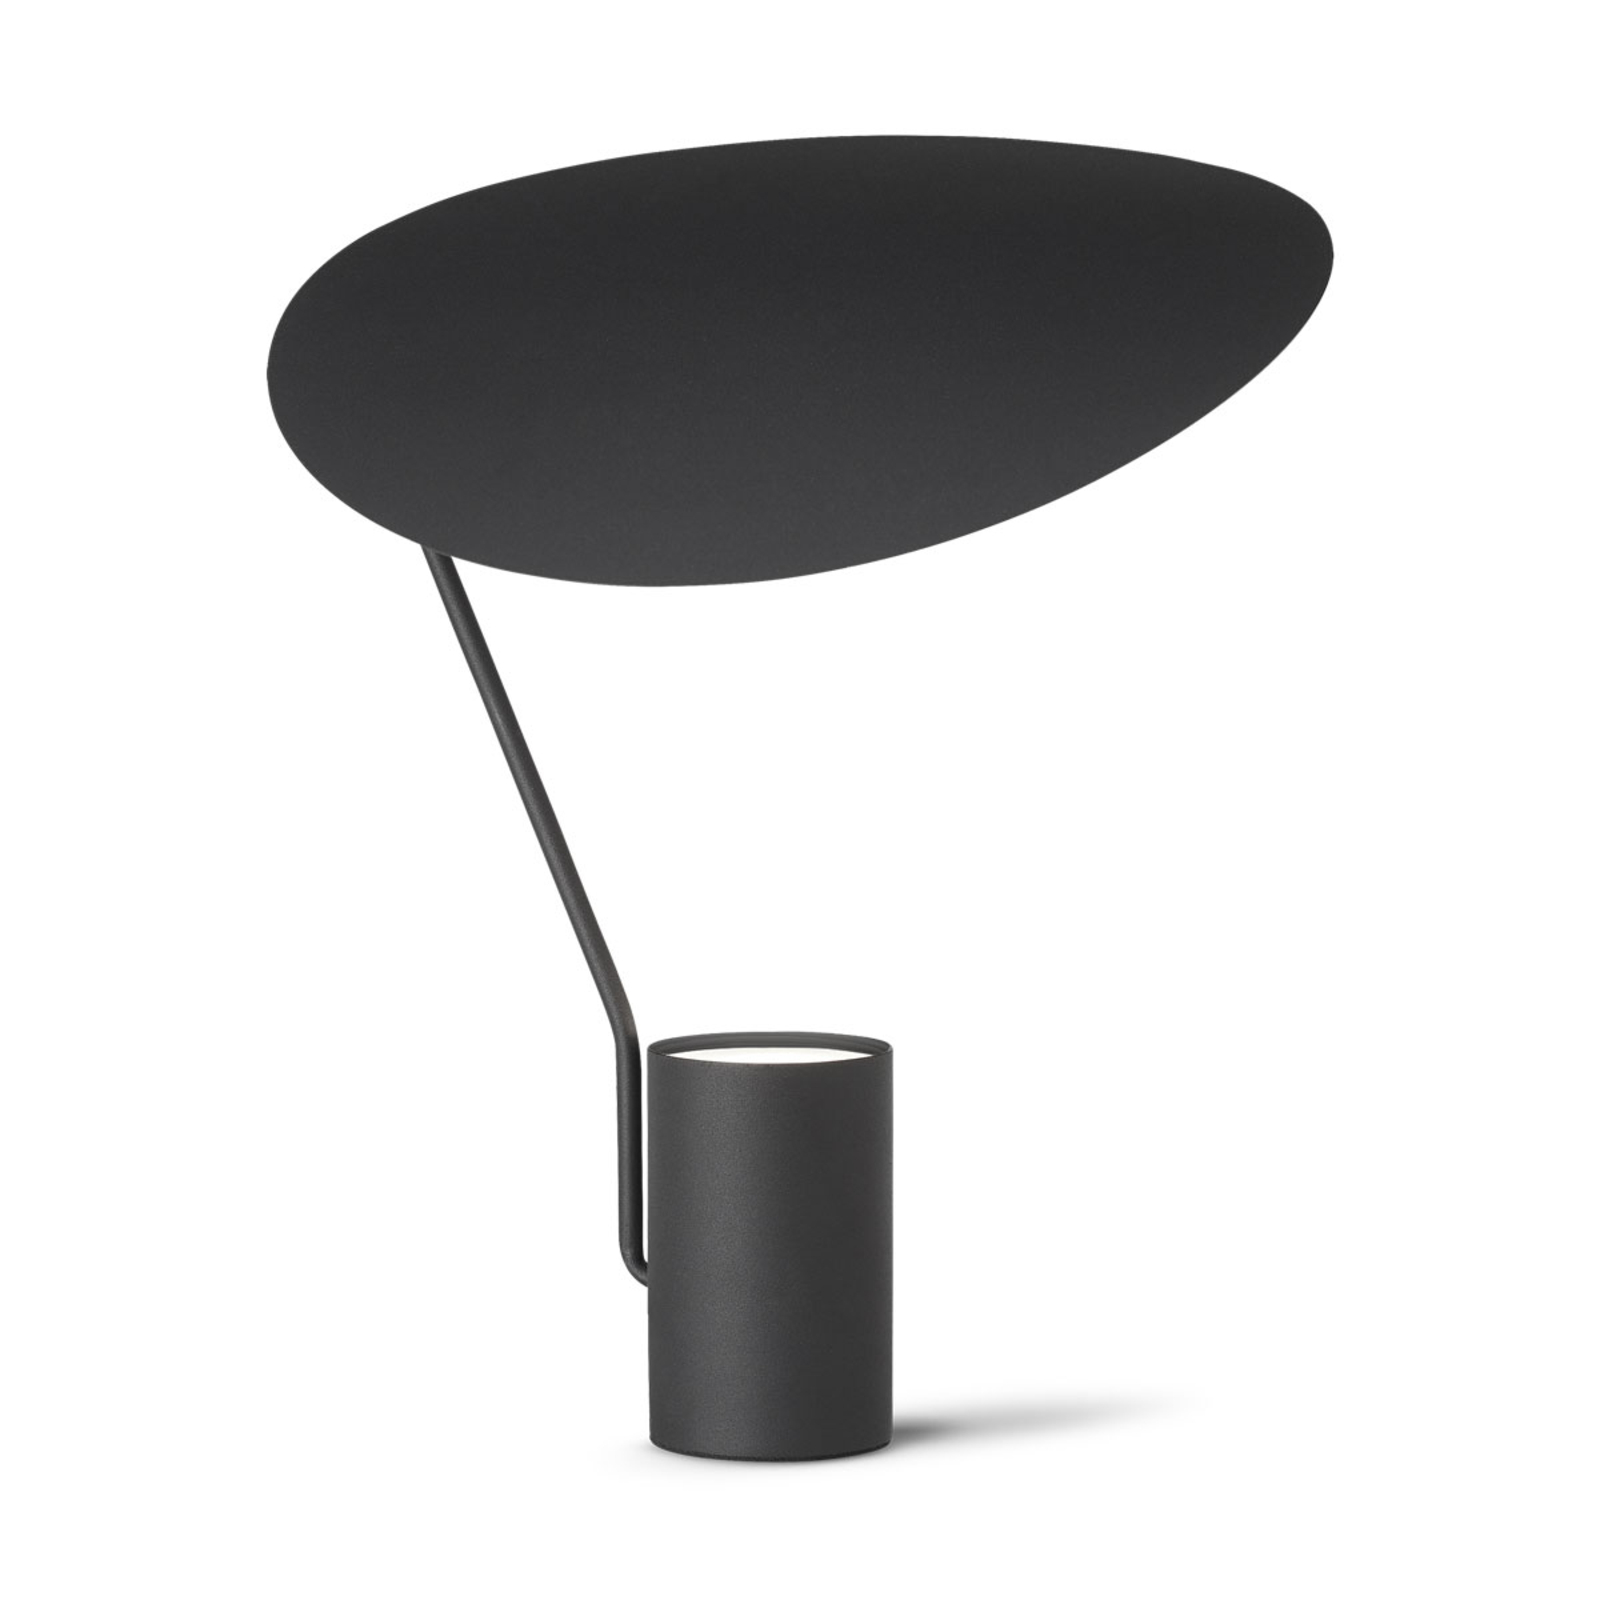 Northern Ombre table lamp black